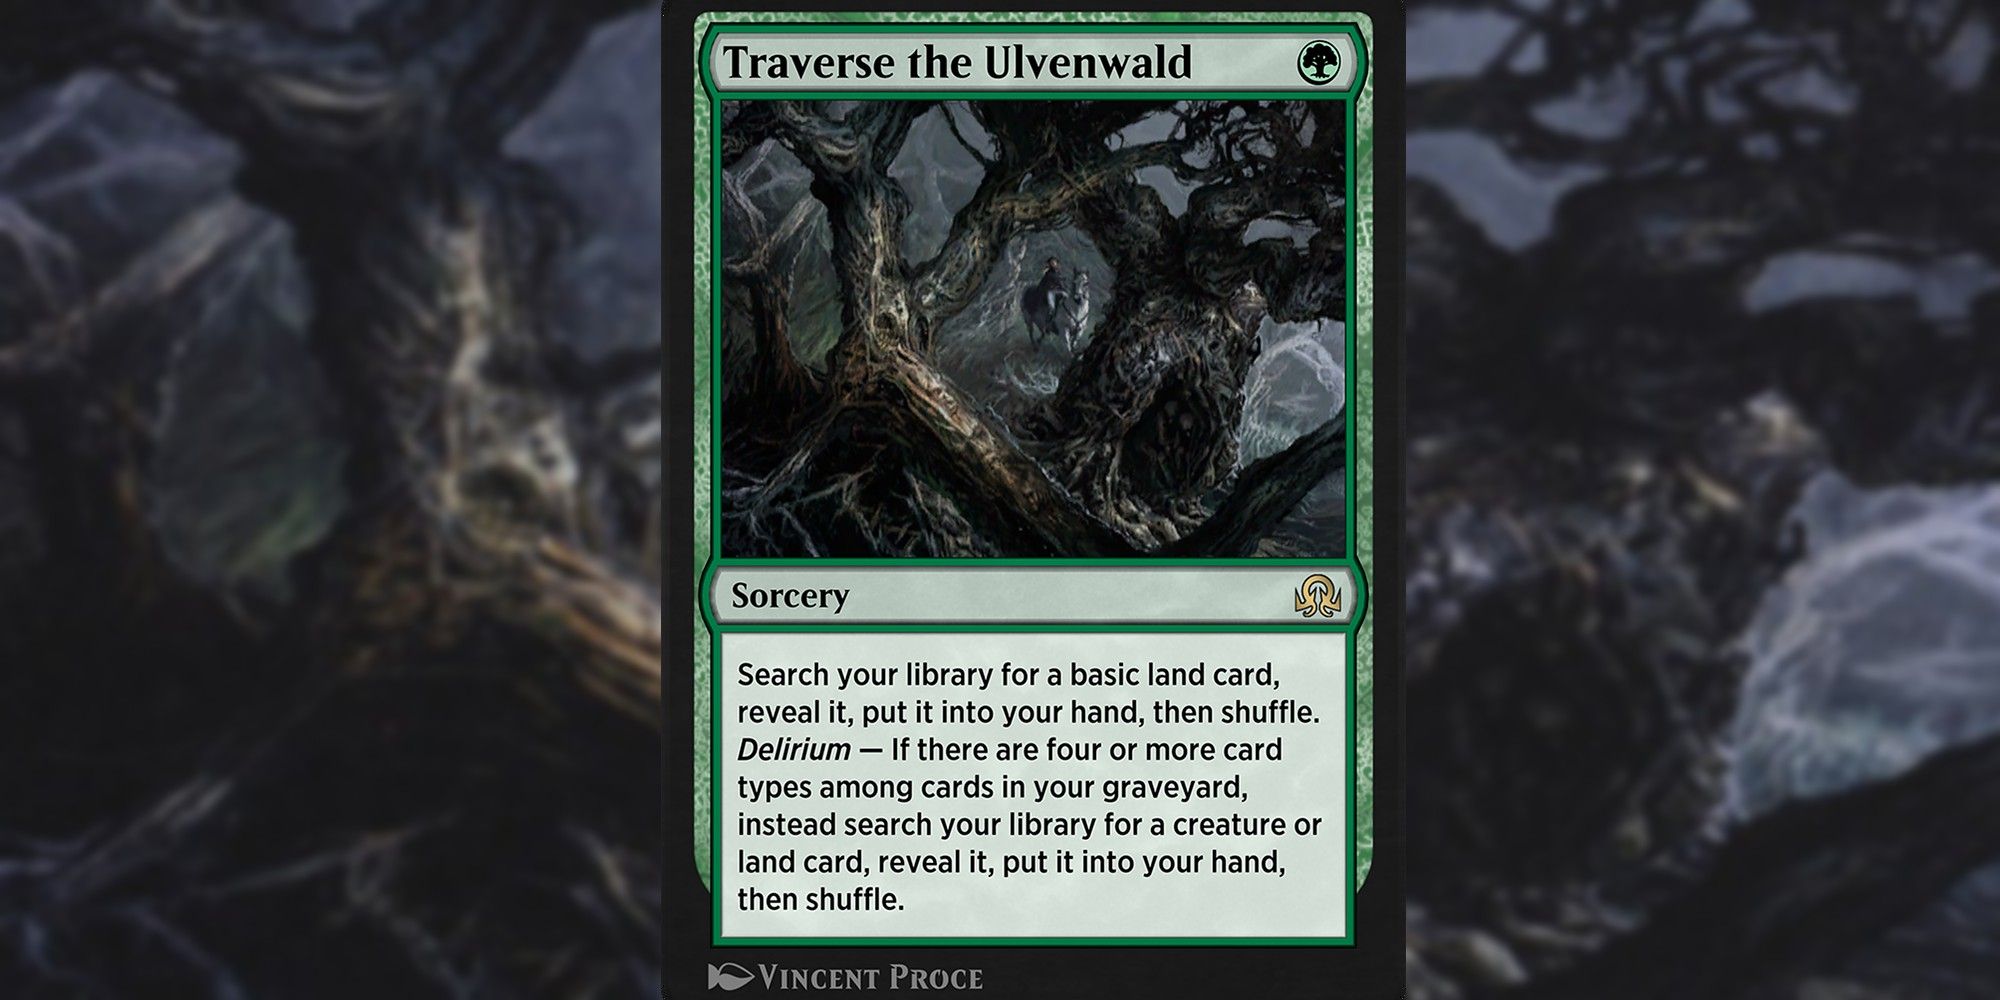 Image of the Traverse the Ulvenwald card in Magic: The Gathering, with art by Vincent Proce